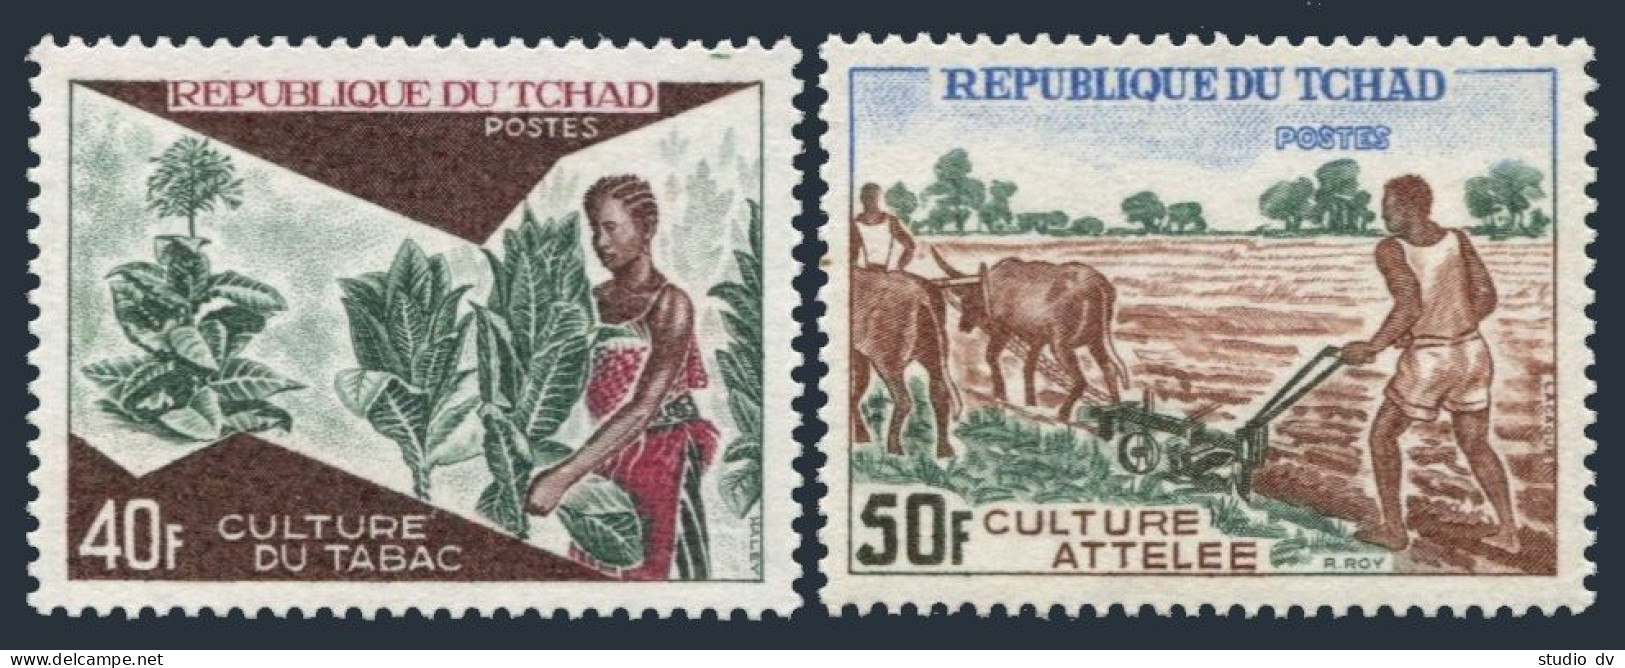 Chad 275-276, MNH. Michel 600-601. Agriculture 1972.Tobacco Cultivation,Plowing. - Tchad (1960-...)